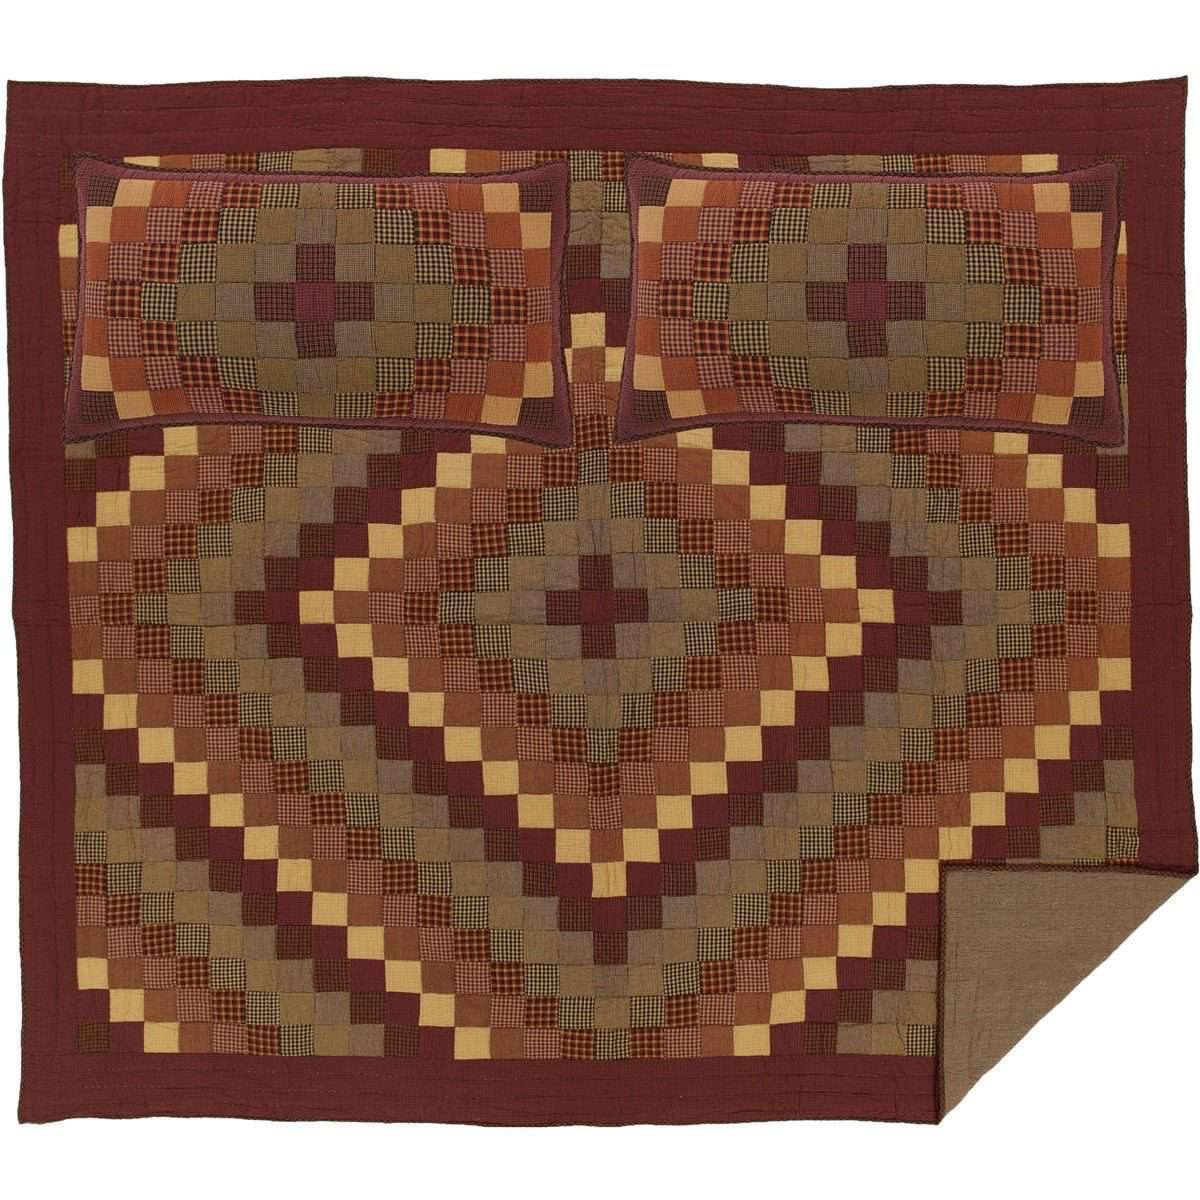 Heritage Farms California King Quilt Set; 1-Quilt 130Wx115L w/2 Shams 21x37 VHC Brands full